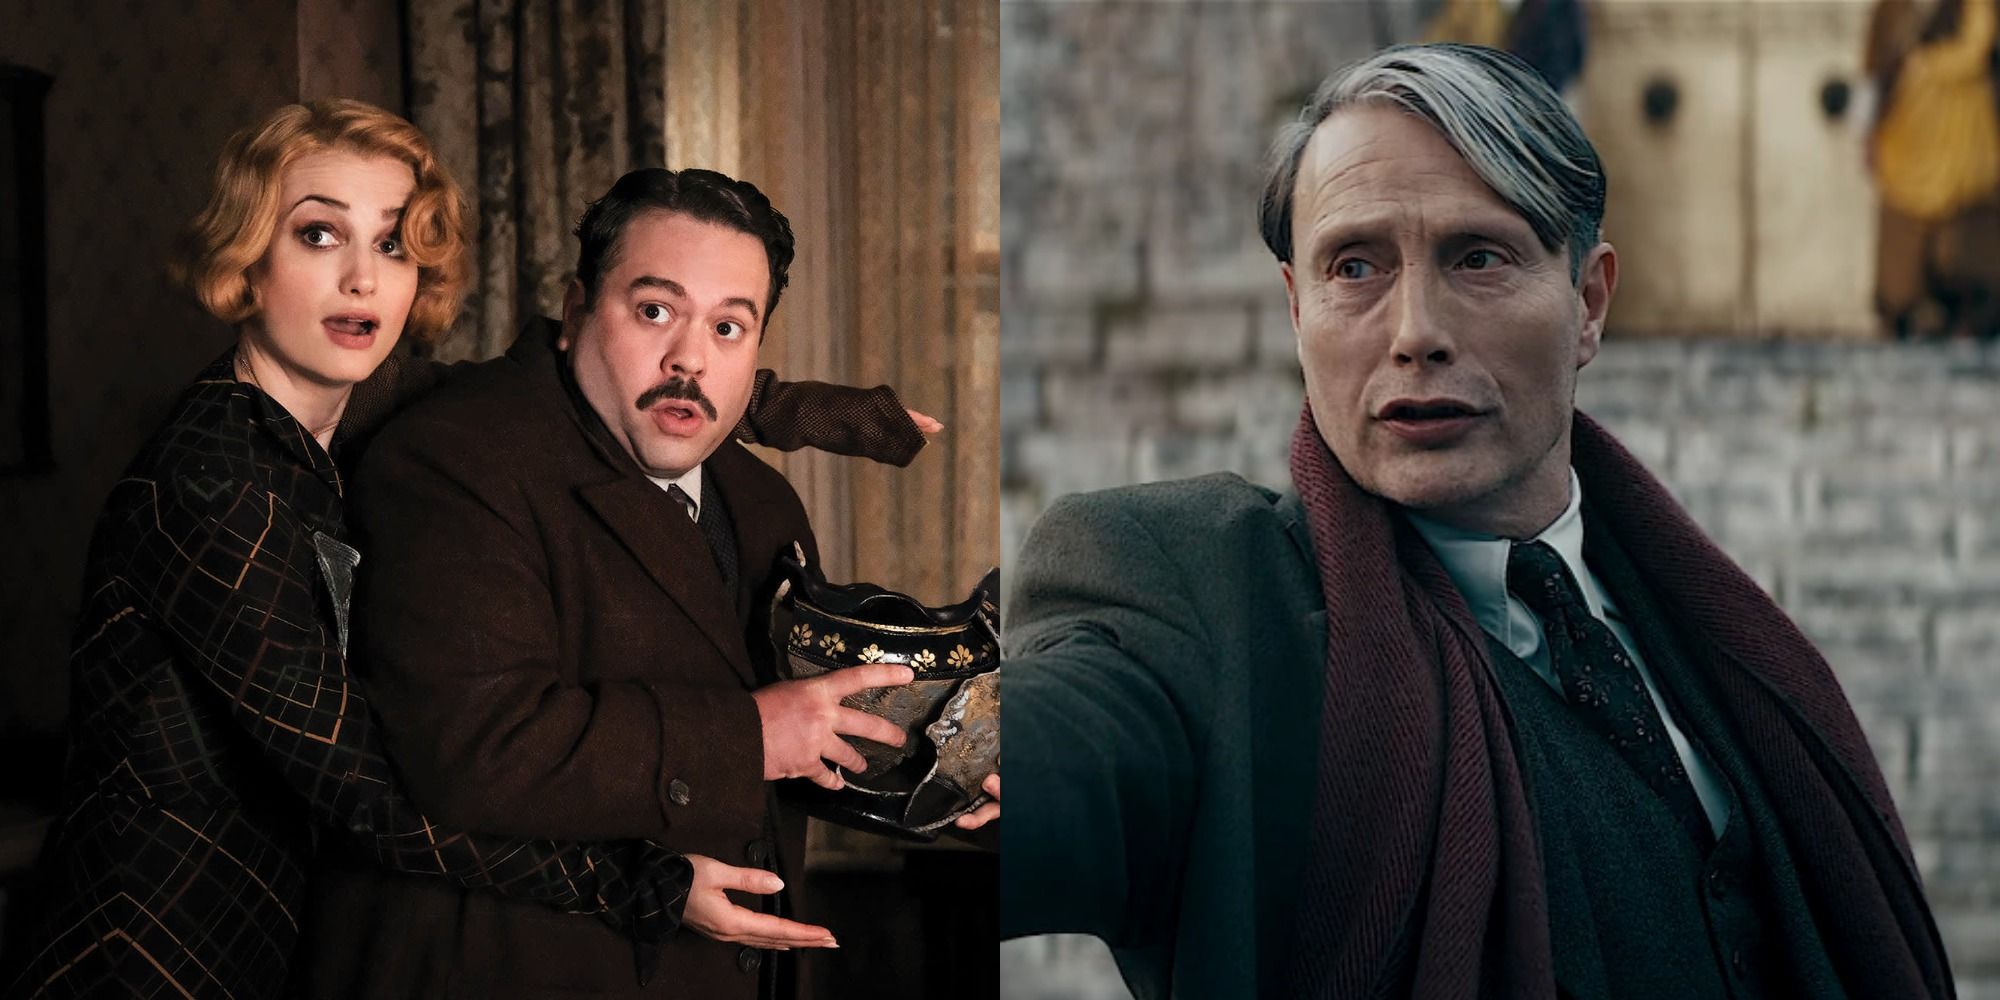 Split image showing Queenie and Jacob and Grindelwald in Fantastic Beasts